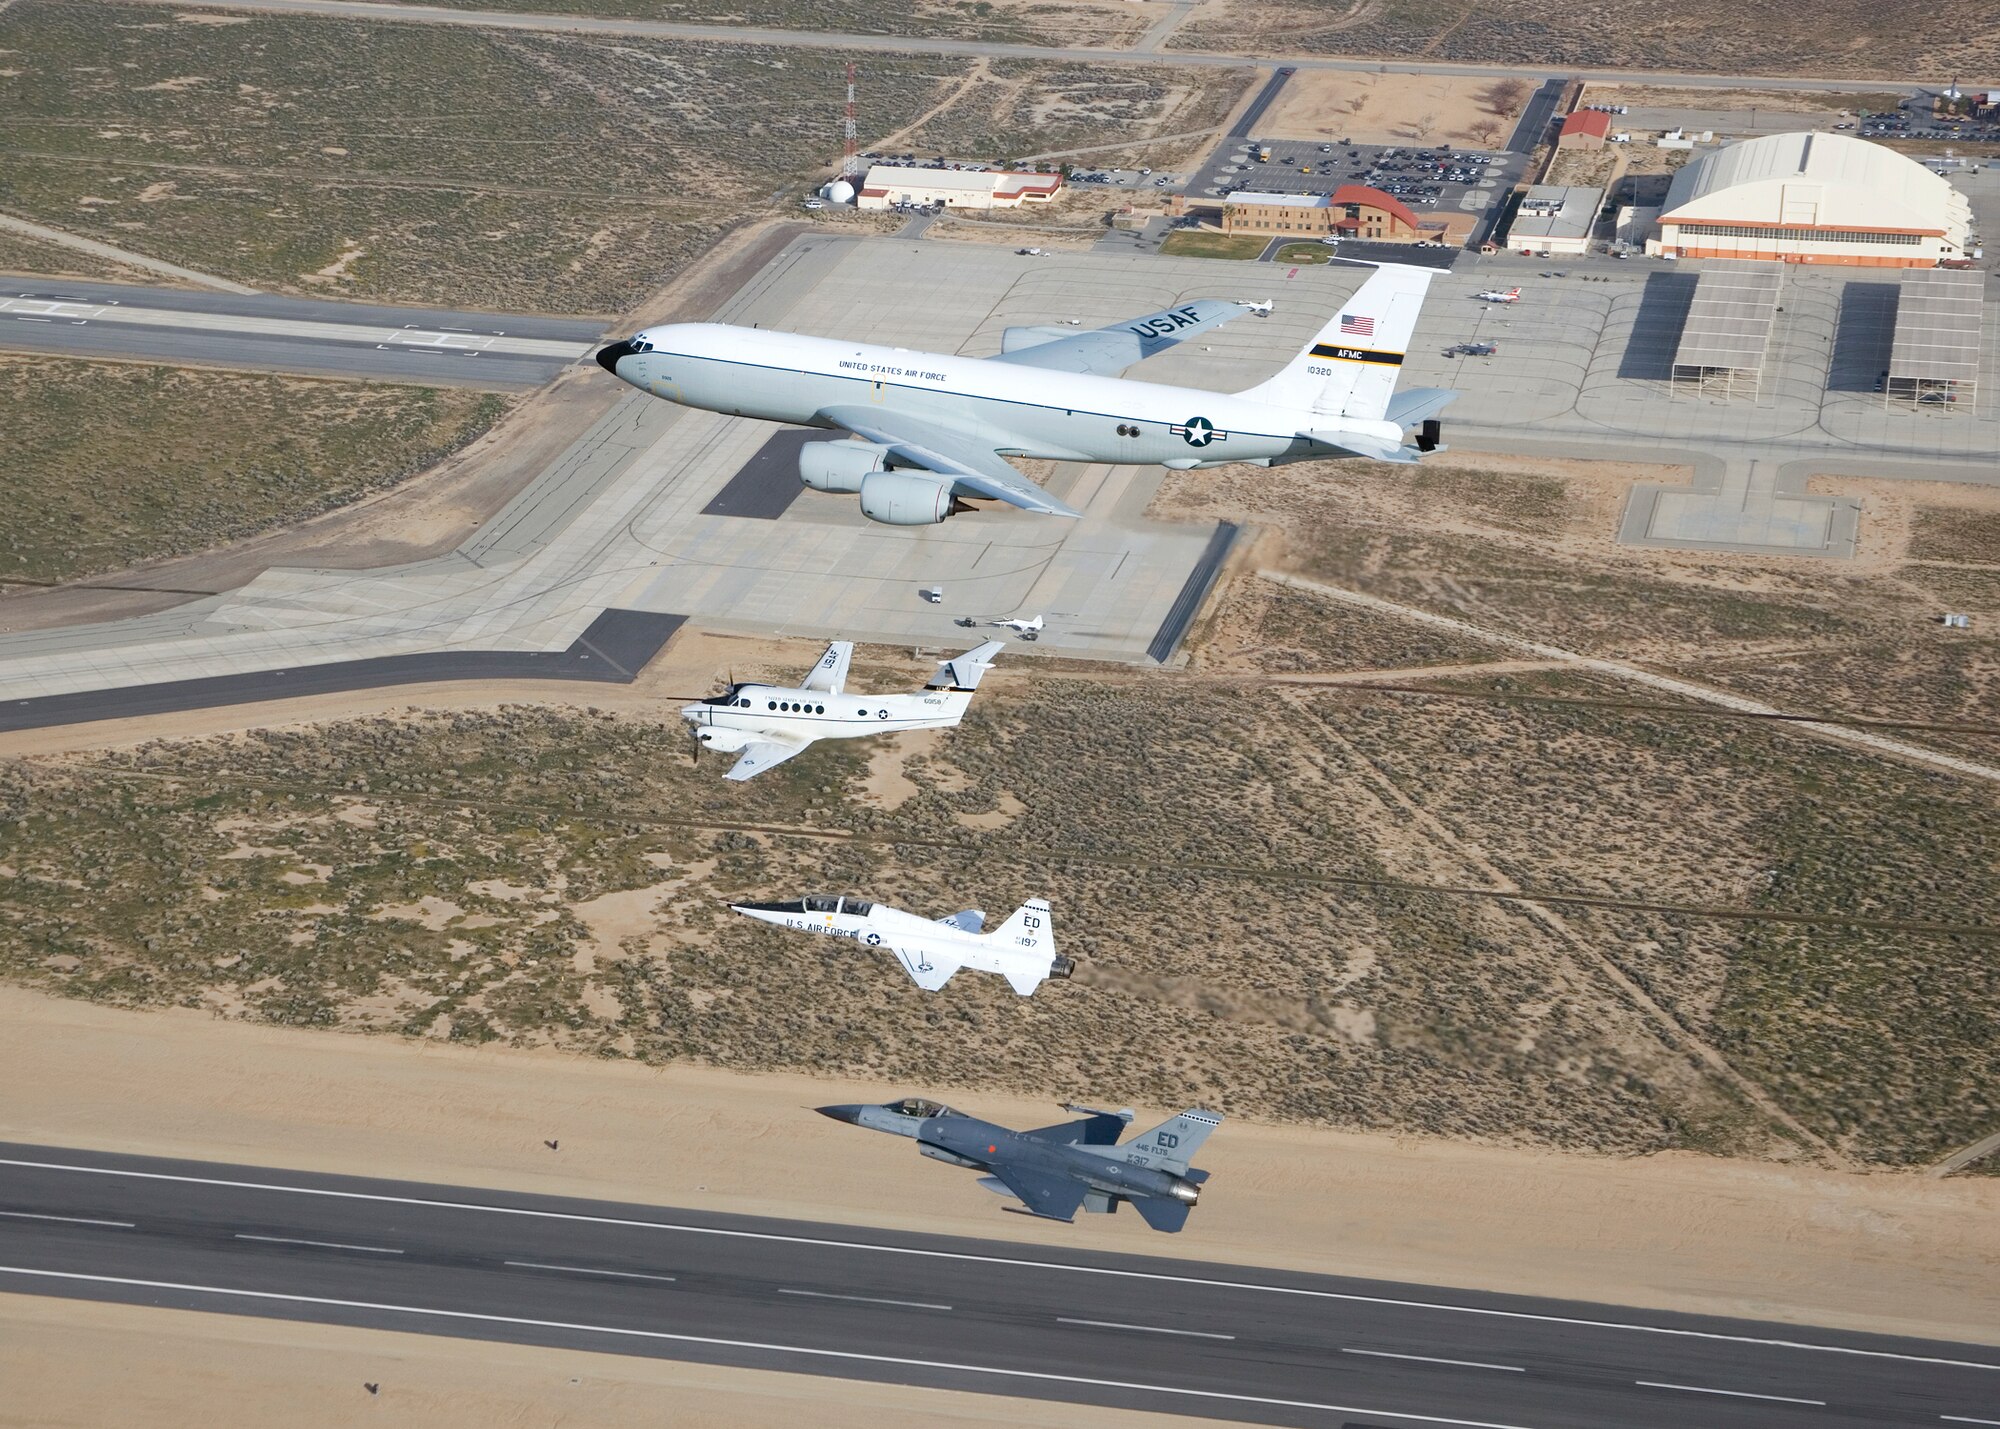 While the 445th Flight Test Squadron was active, the squadron flew four airframes under its tenure, which included the KC-135 Stratotanker, C-12 Huron, T-38 Talon and F-16 Falcon. As of May 1, the 445th Flight Test Squadron has been consolidated into three other Combined Test Forces. From 2002 until present, the mission of the 445th FLTS and Test Operations Combined Test Force has been to conduct flight testing for the warfighter, support flight test execution, and to be a center of excellence for all types of flight test training. (U.S. Air Force photo by Jet Fabara)